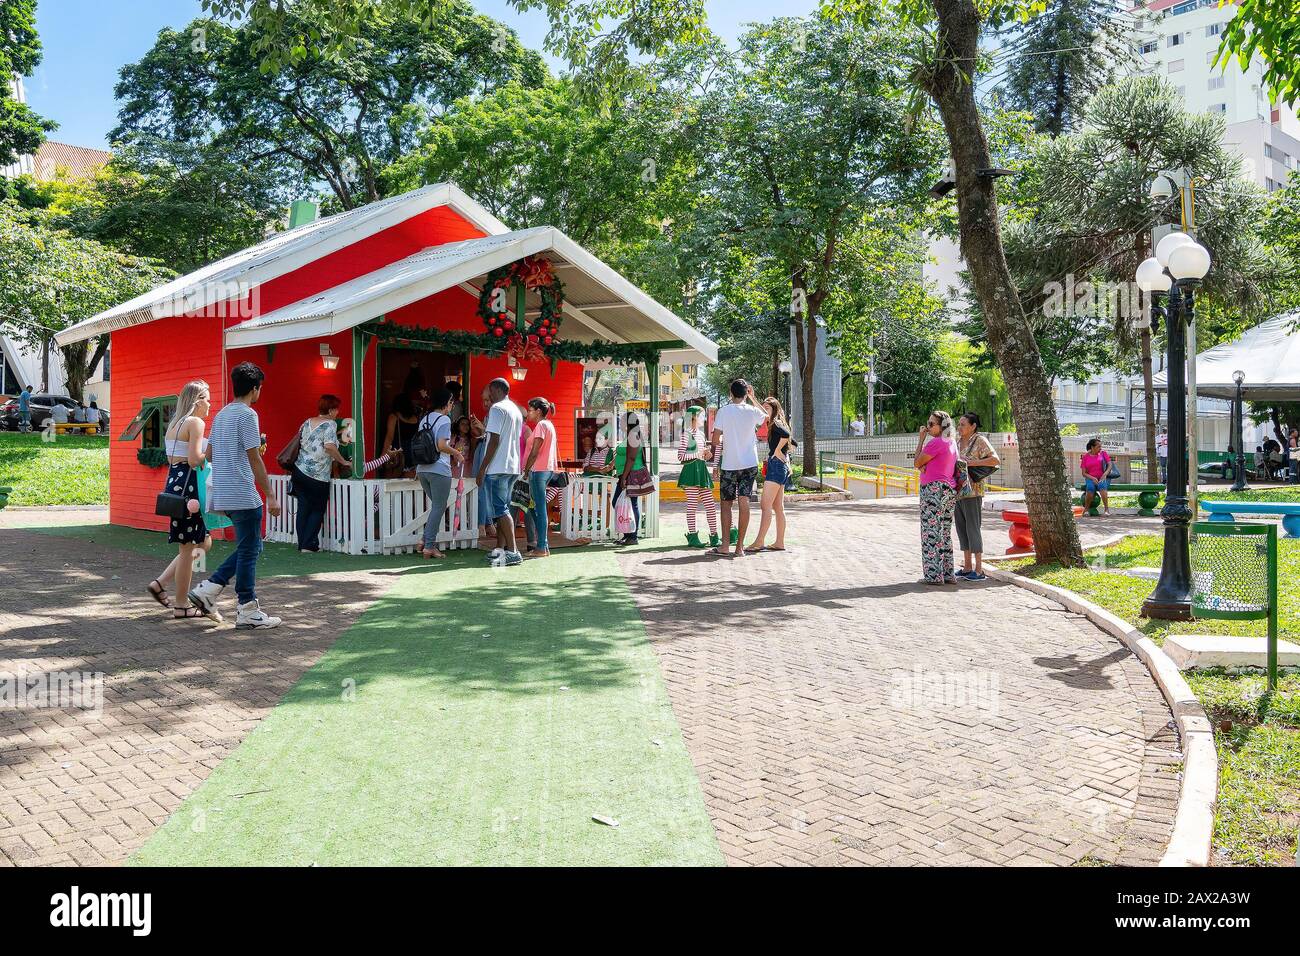 Londrina PR, Brazil - December 23, 2019: Santa Claus house being visited by people at Praca da Bandeira Square during christmas month. Stock Photo